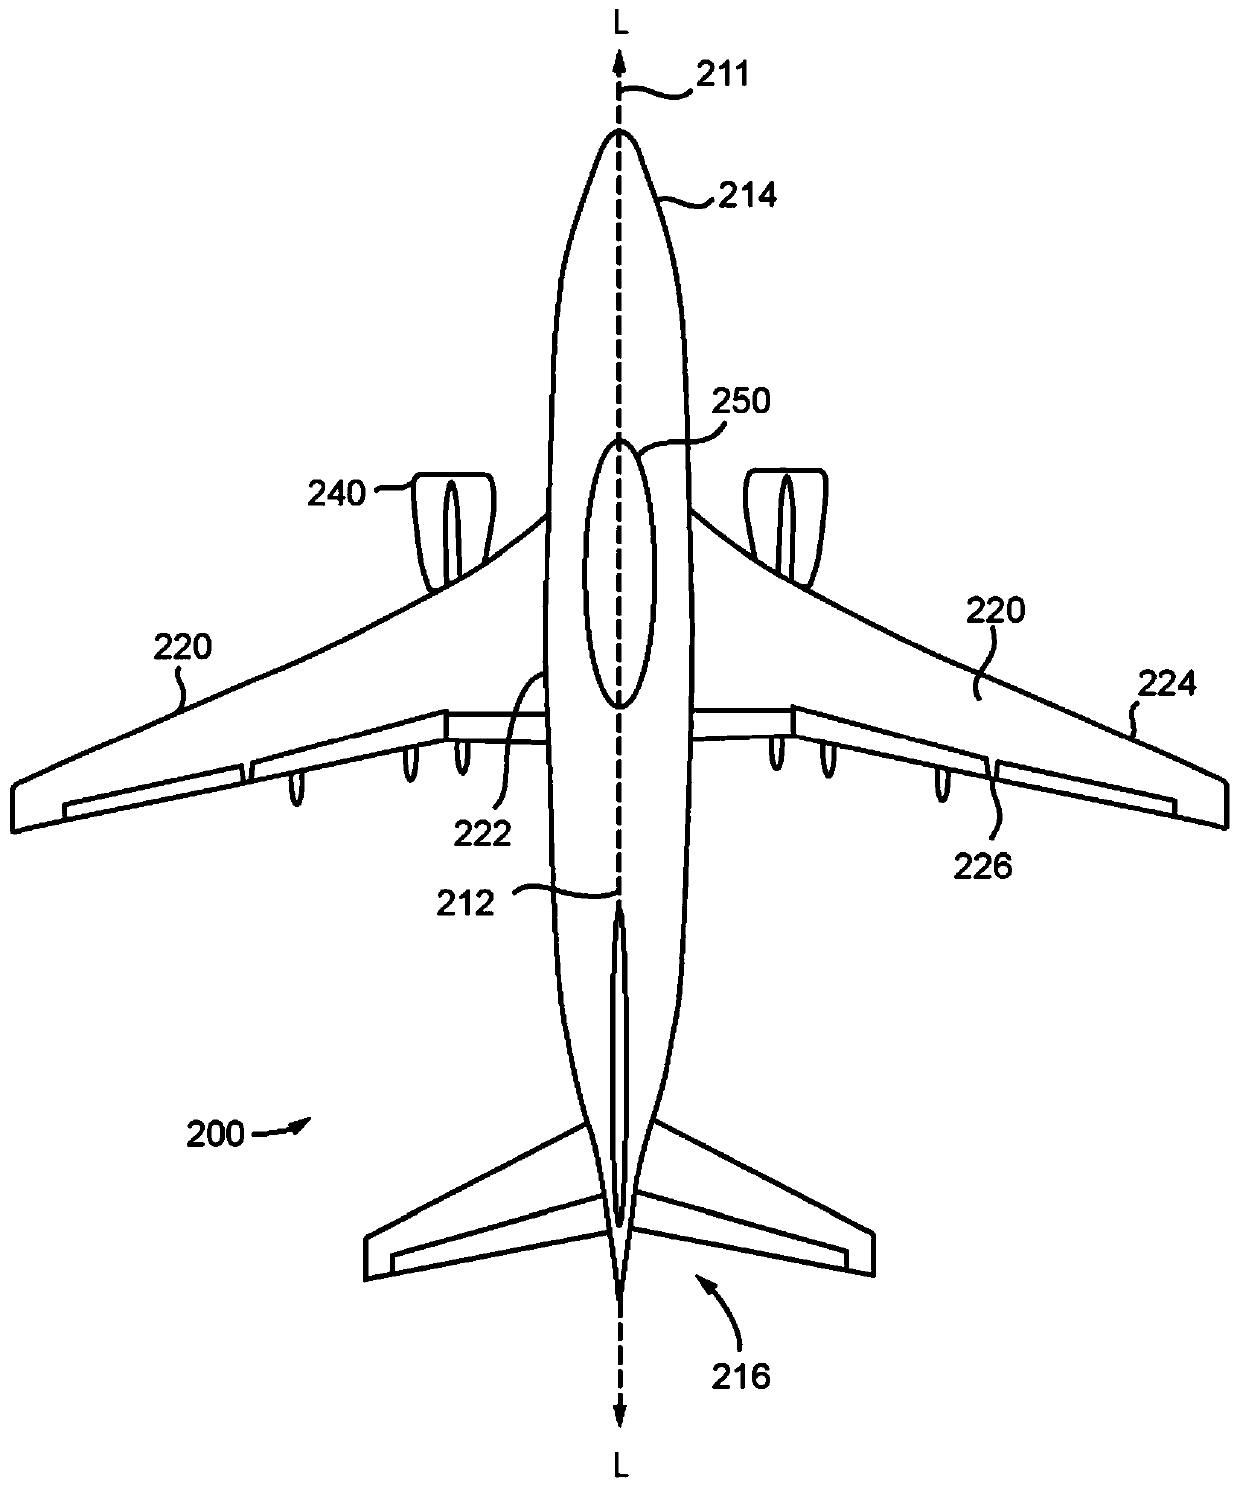 Cupola fairing for an aircraft and method for fabricating the same